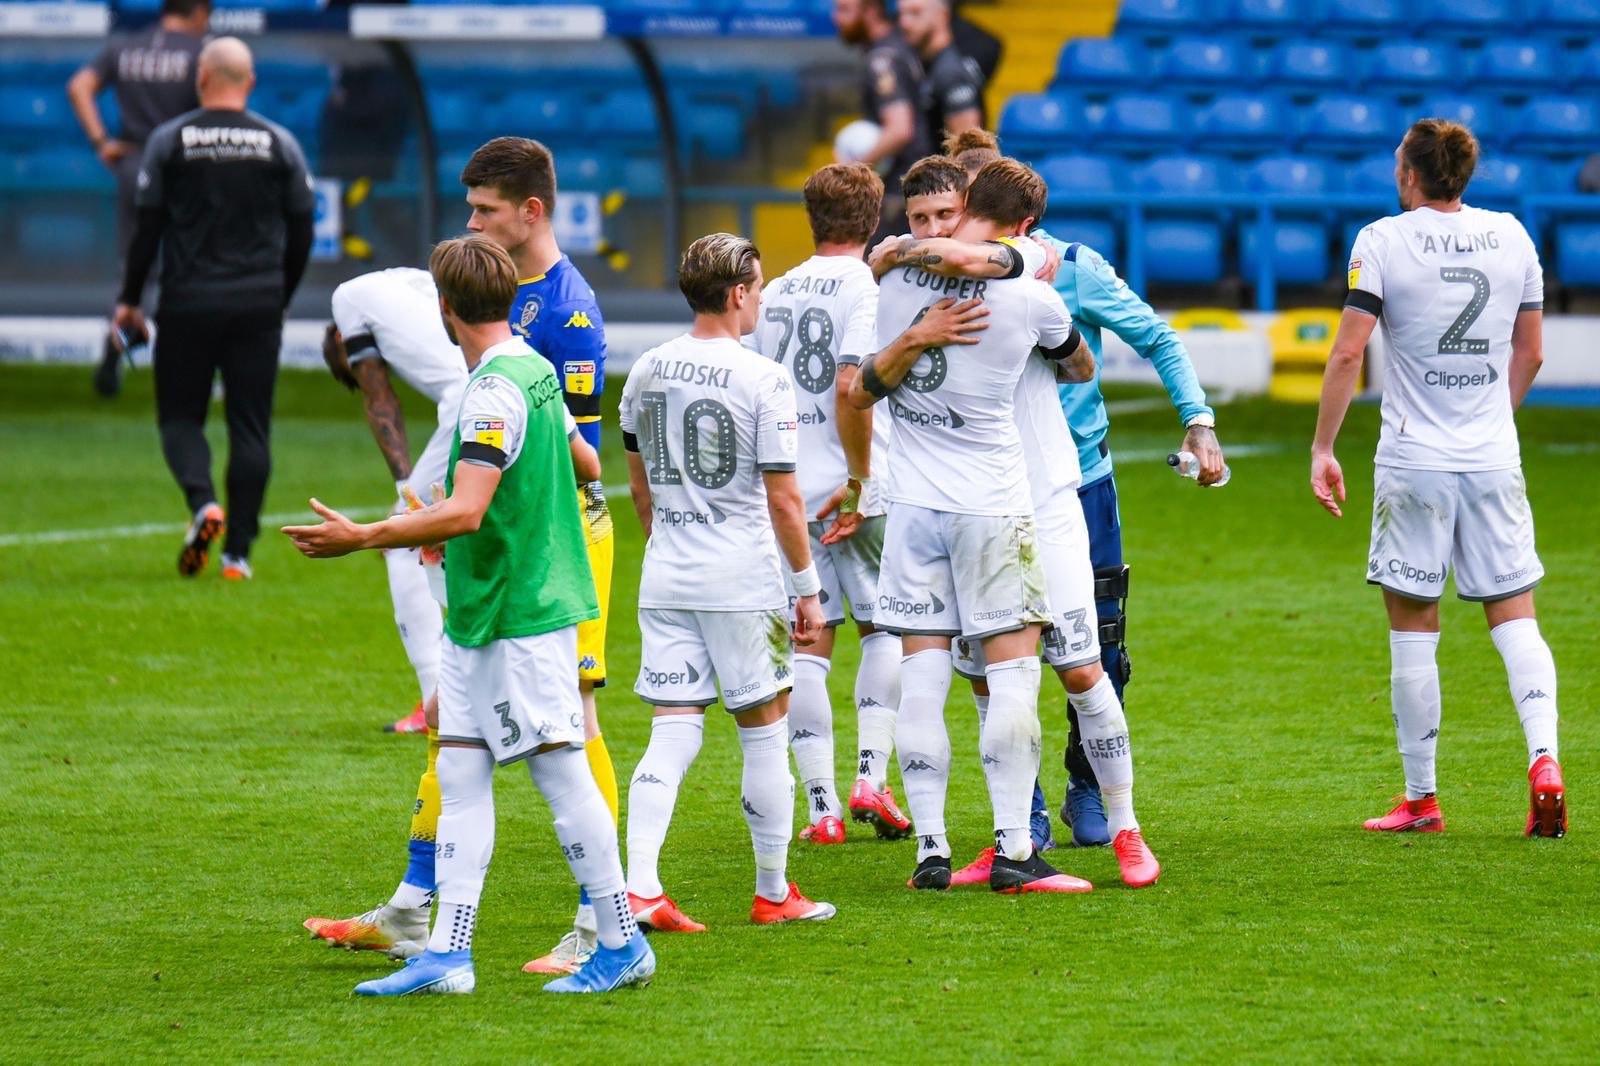 Leeds United Beat Ajayi’s West Brom To Championship Crown